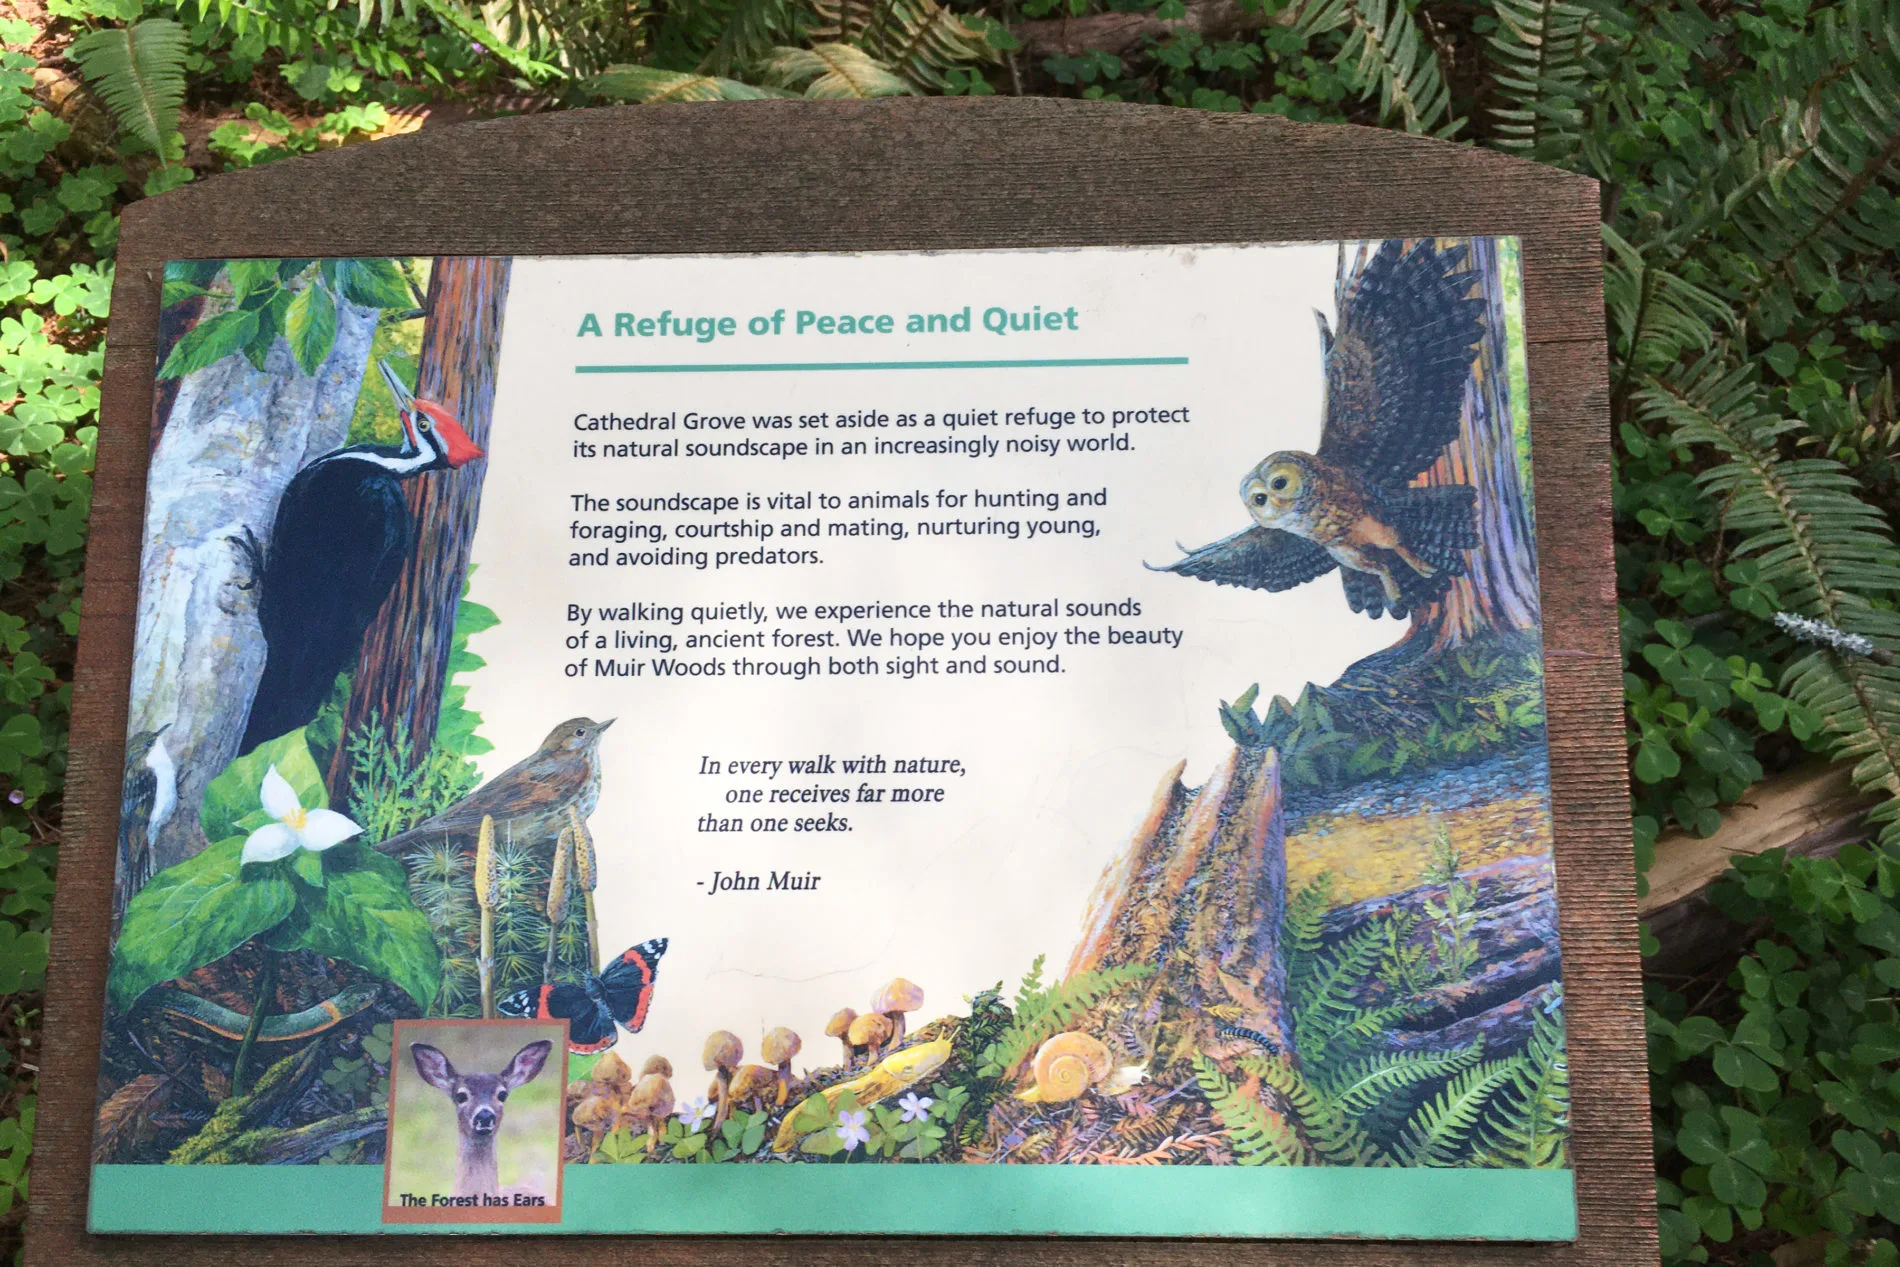 A sign in Cathedral Grove in Muir Woods suggests walking quietly and listening to the sounds of nature.